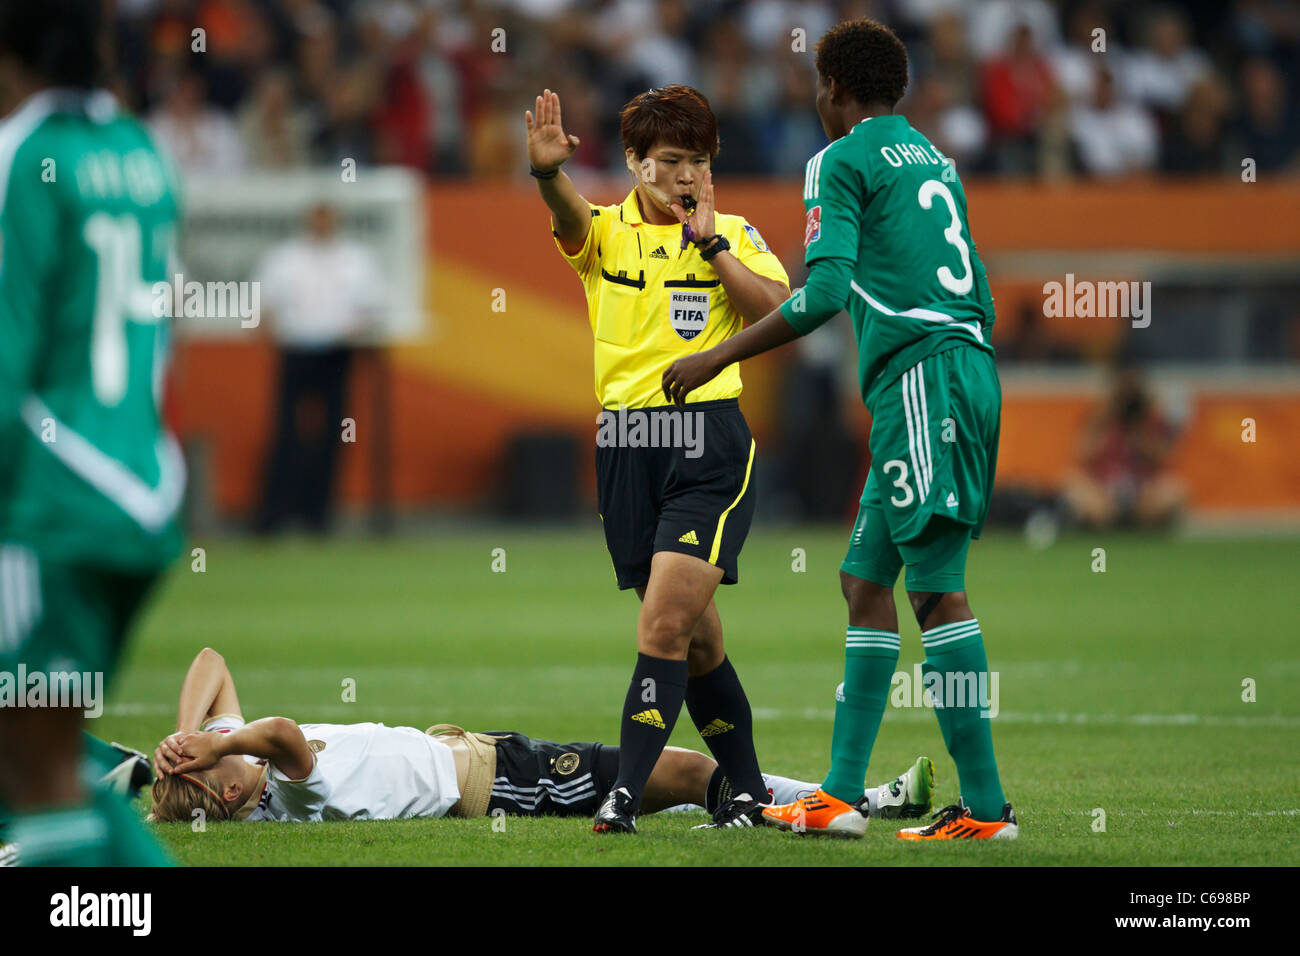 Referee Sung Mi Cha blows her whistle to call a foul on Osinache Ohale of Nigeria (3) during a 2011 Women's World Cup match. Stock Photo